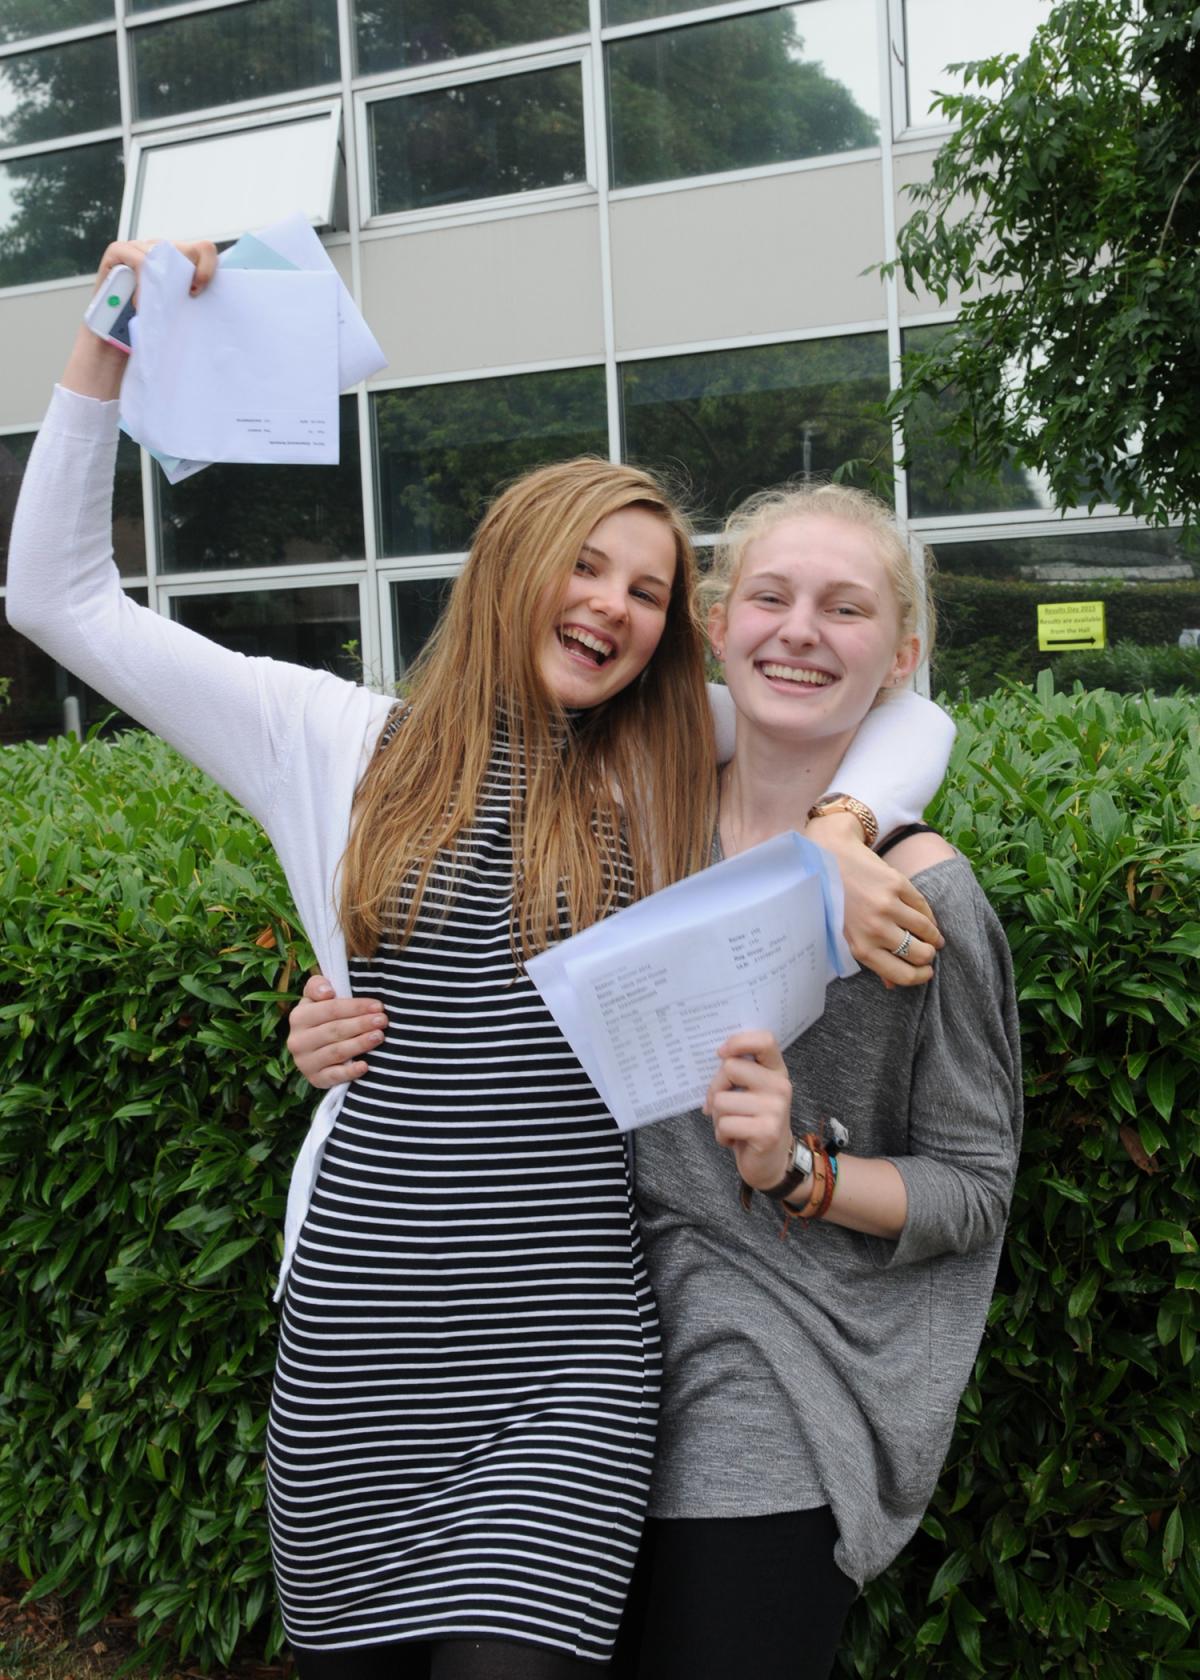 Wycombe High School A Level results Amanda Greenwood (Sports Technology Loughborough) and Olivia Goodall (English and Film at Exeter)